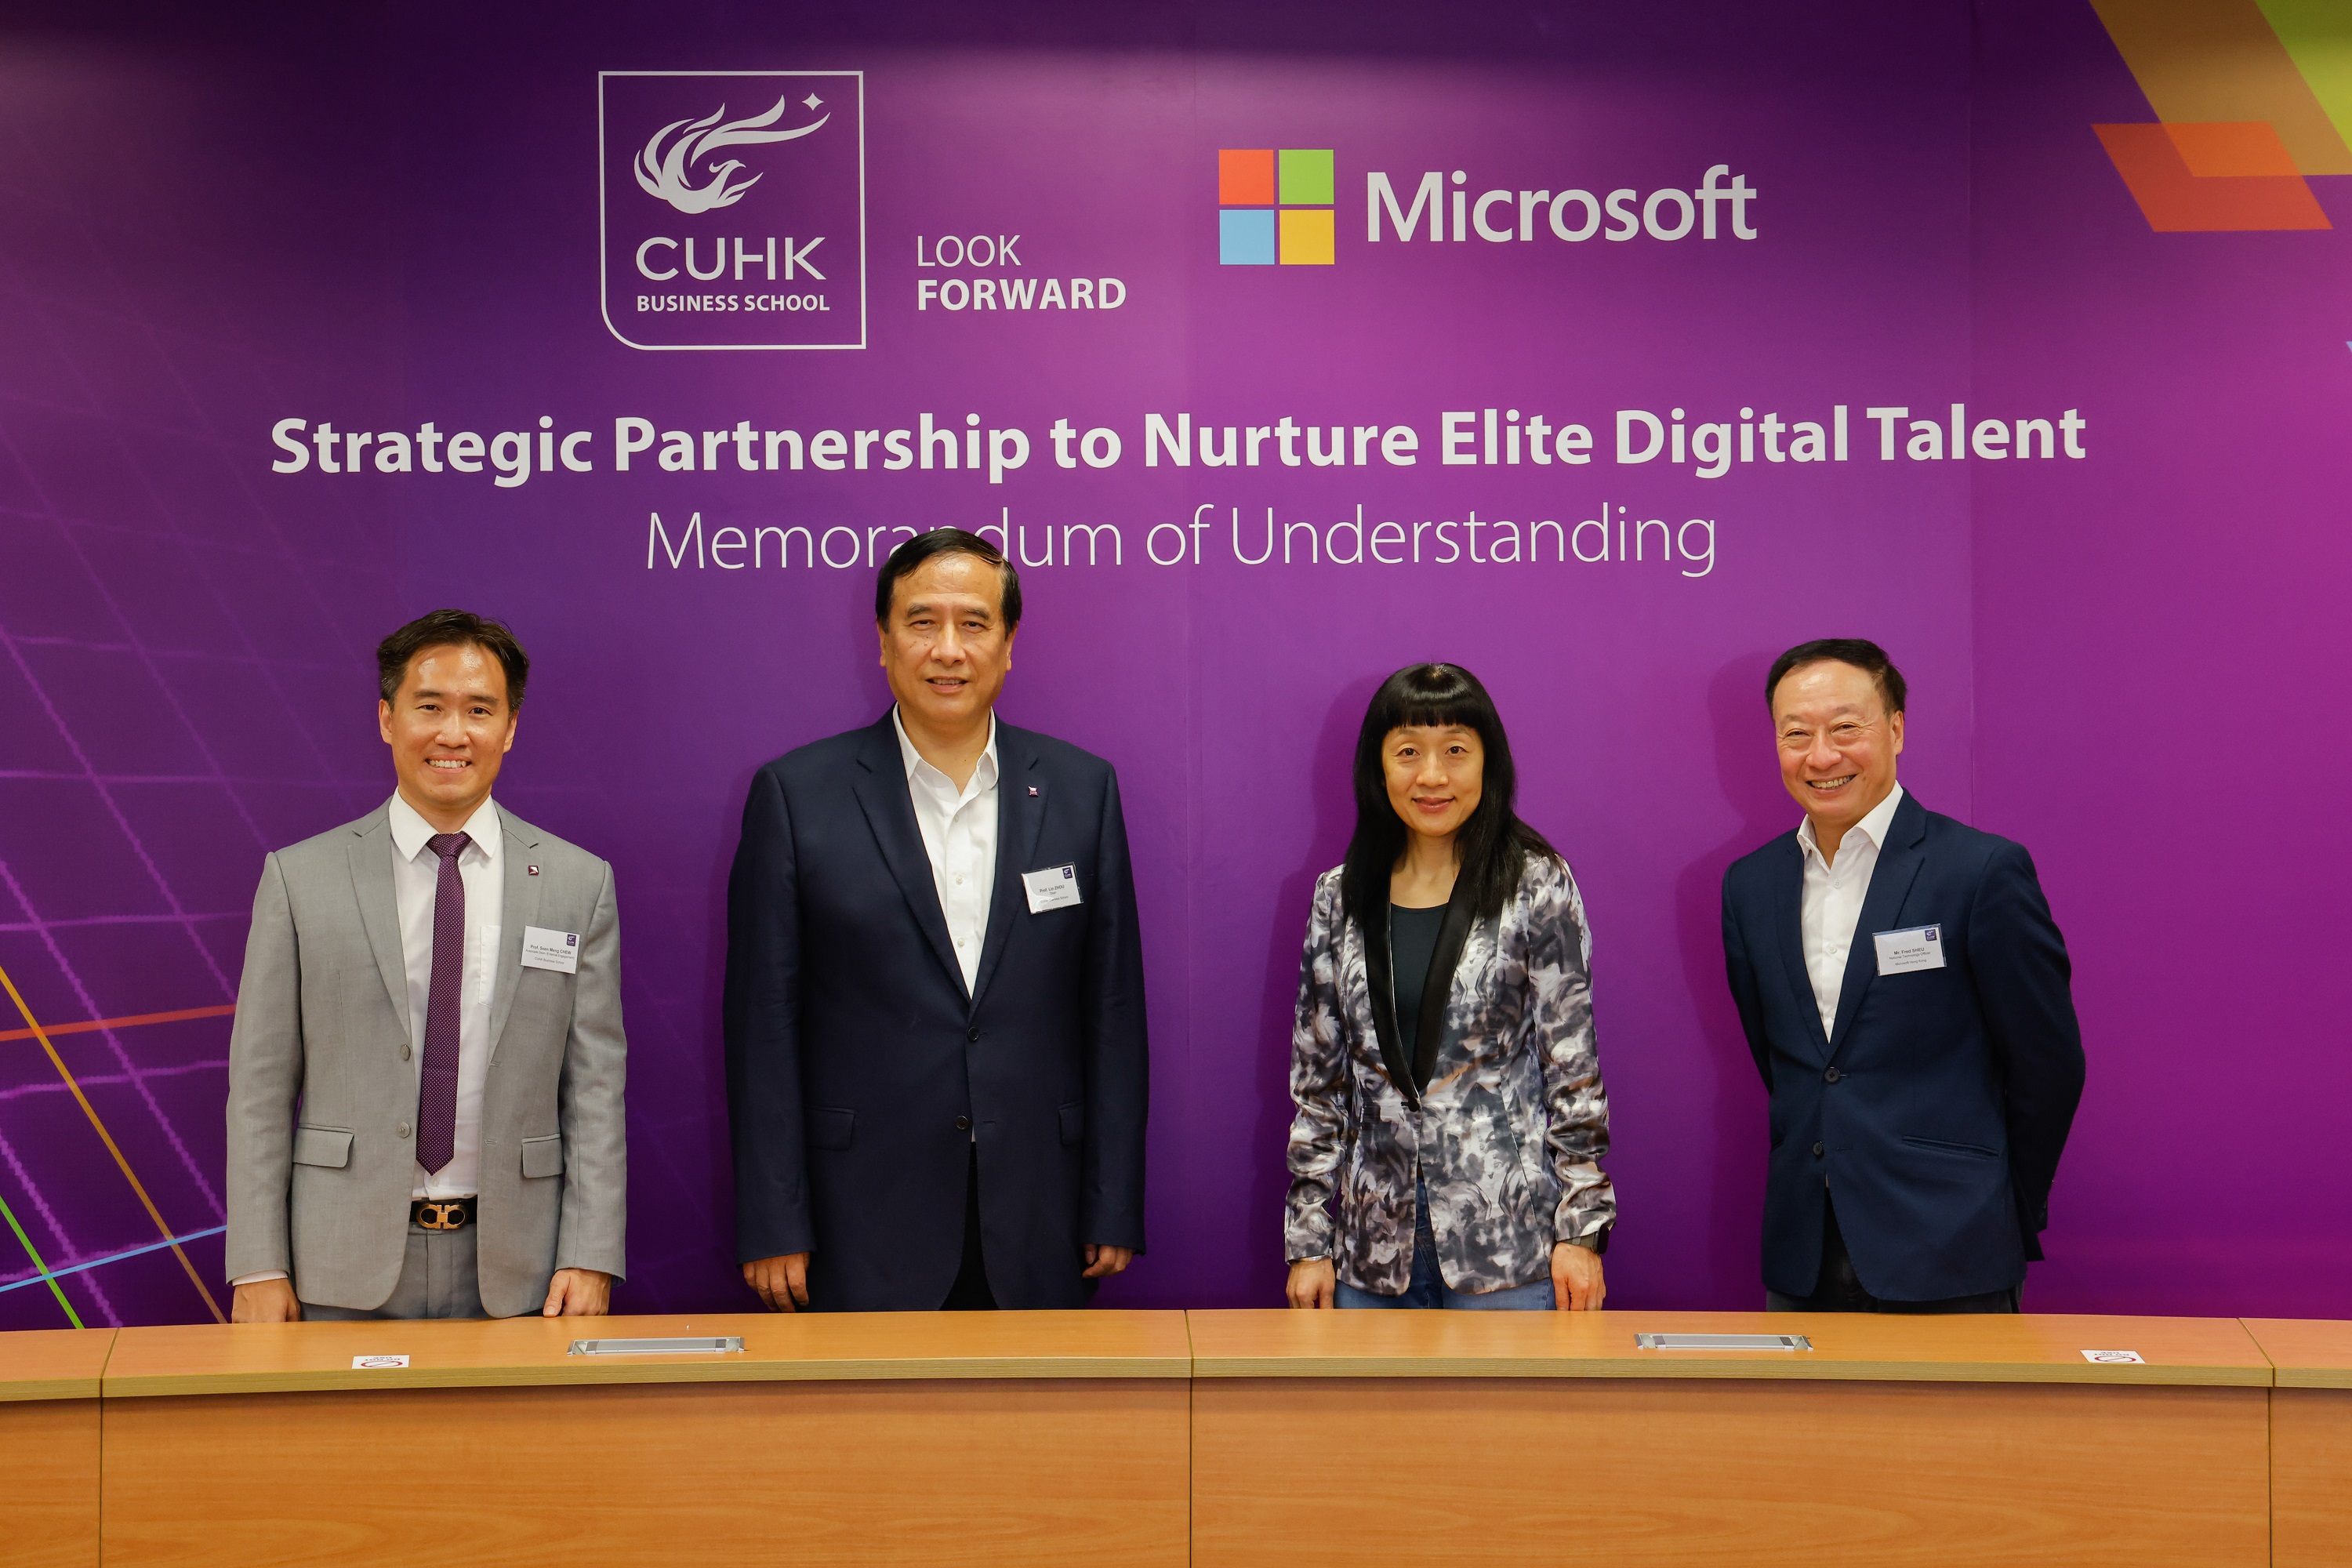 (From Left to Right) Prof. Seen-Meng Chew, Associate Dean (External Engagement) of CUHK Business School, Prof. Lin Zhou, Dean of CUHK Business School, Cally Chan, General Manager of Microsoft Hong Kong and Macau and Mr. Fred Sheu, National Technology Officer, Microsoft Hong Kong, announced the 